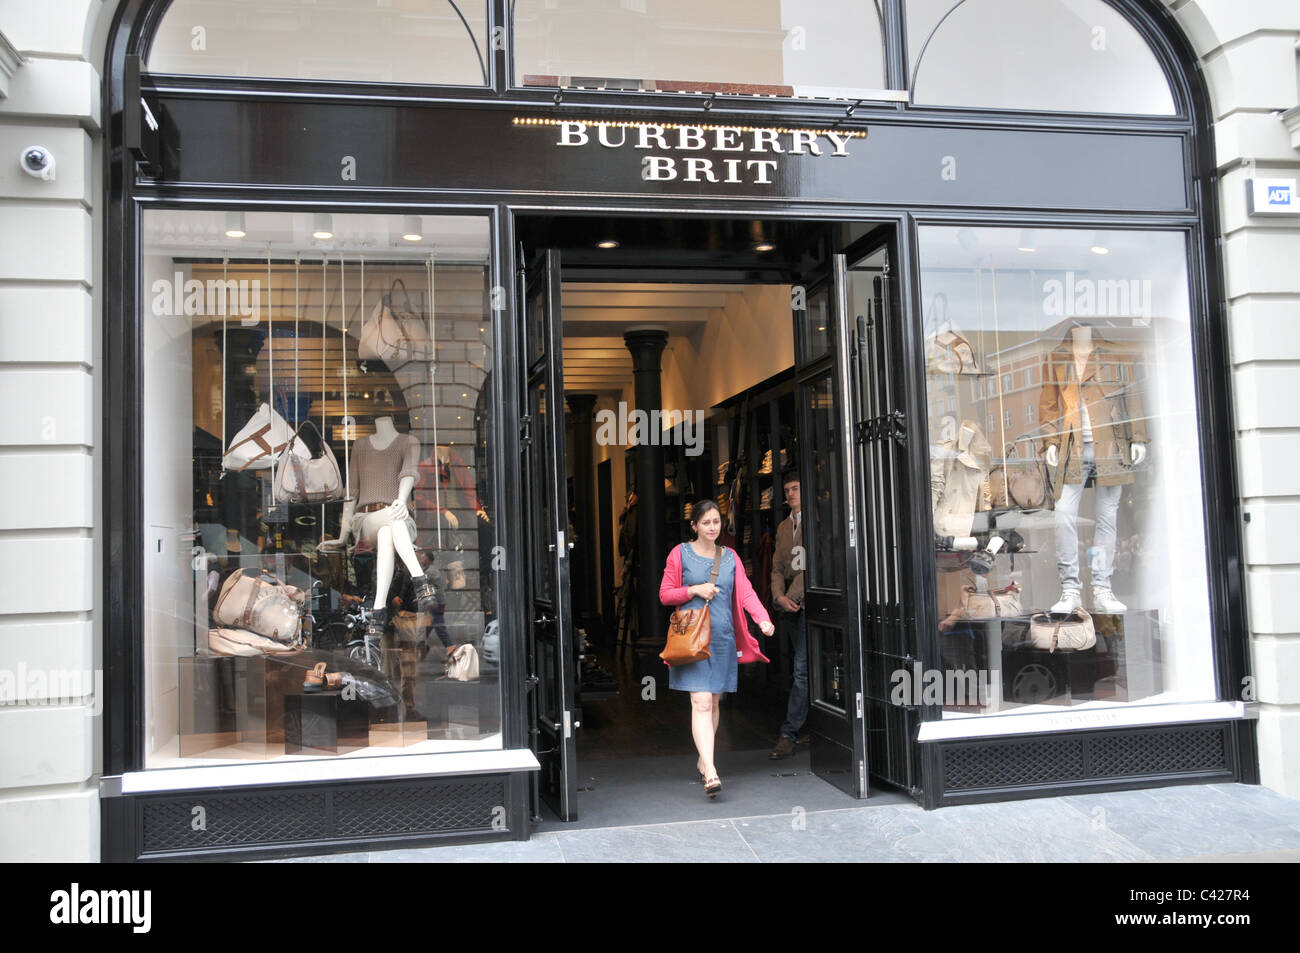 Burberry Brit Covent Garden Store London fashion style British clothing  brand Stock Photo - Alamy